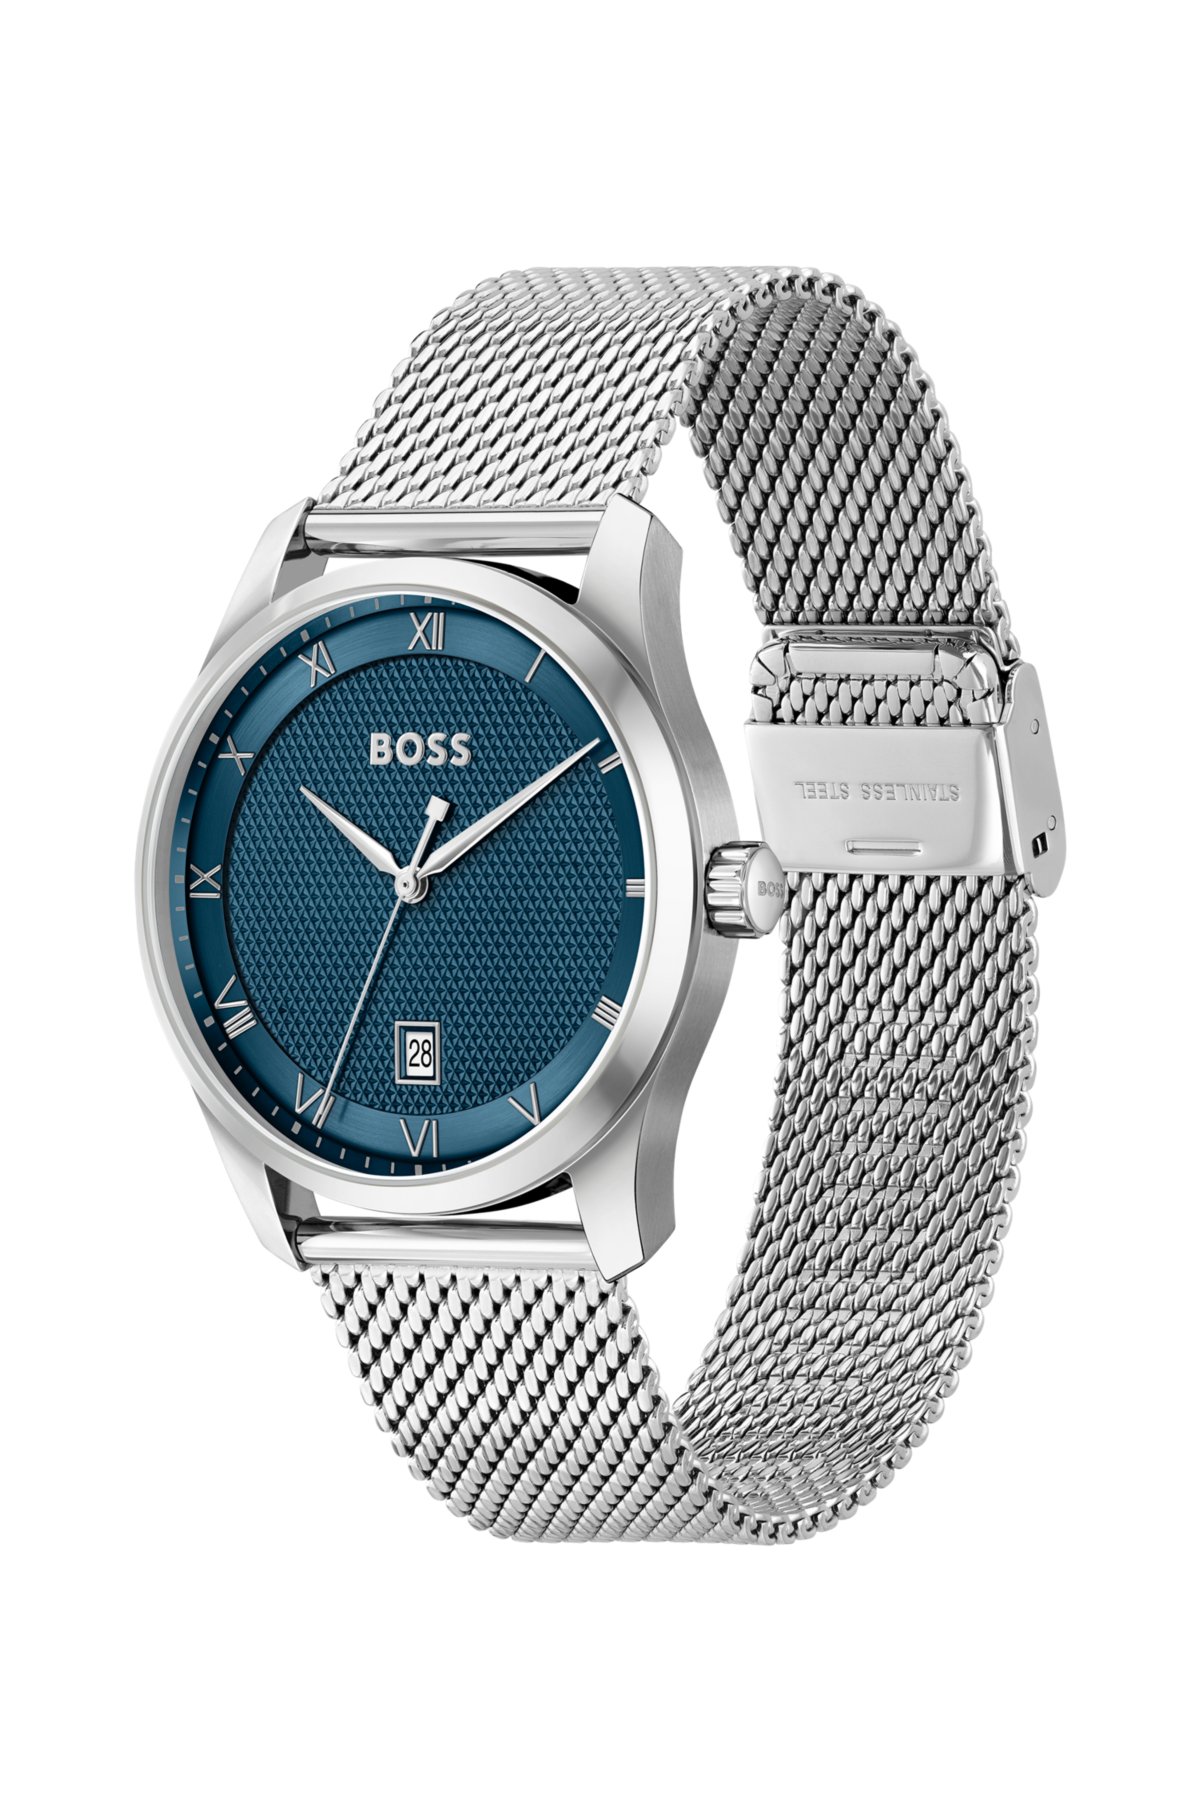 Mesh-bracelet watch with blue patterned dial, Silver